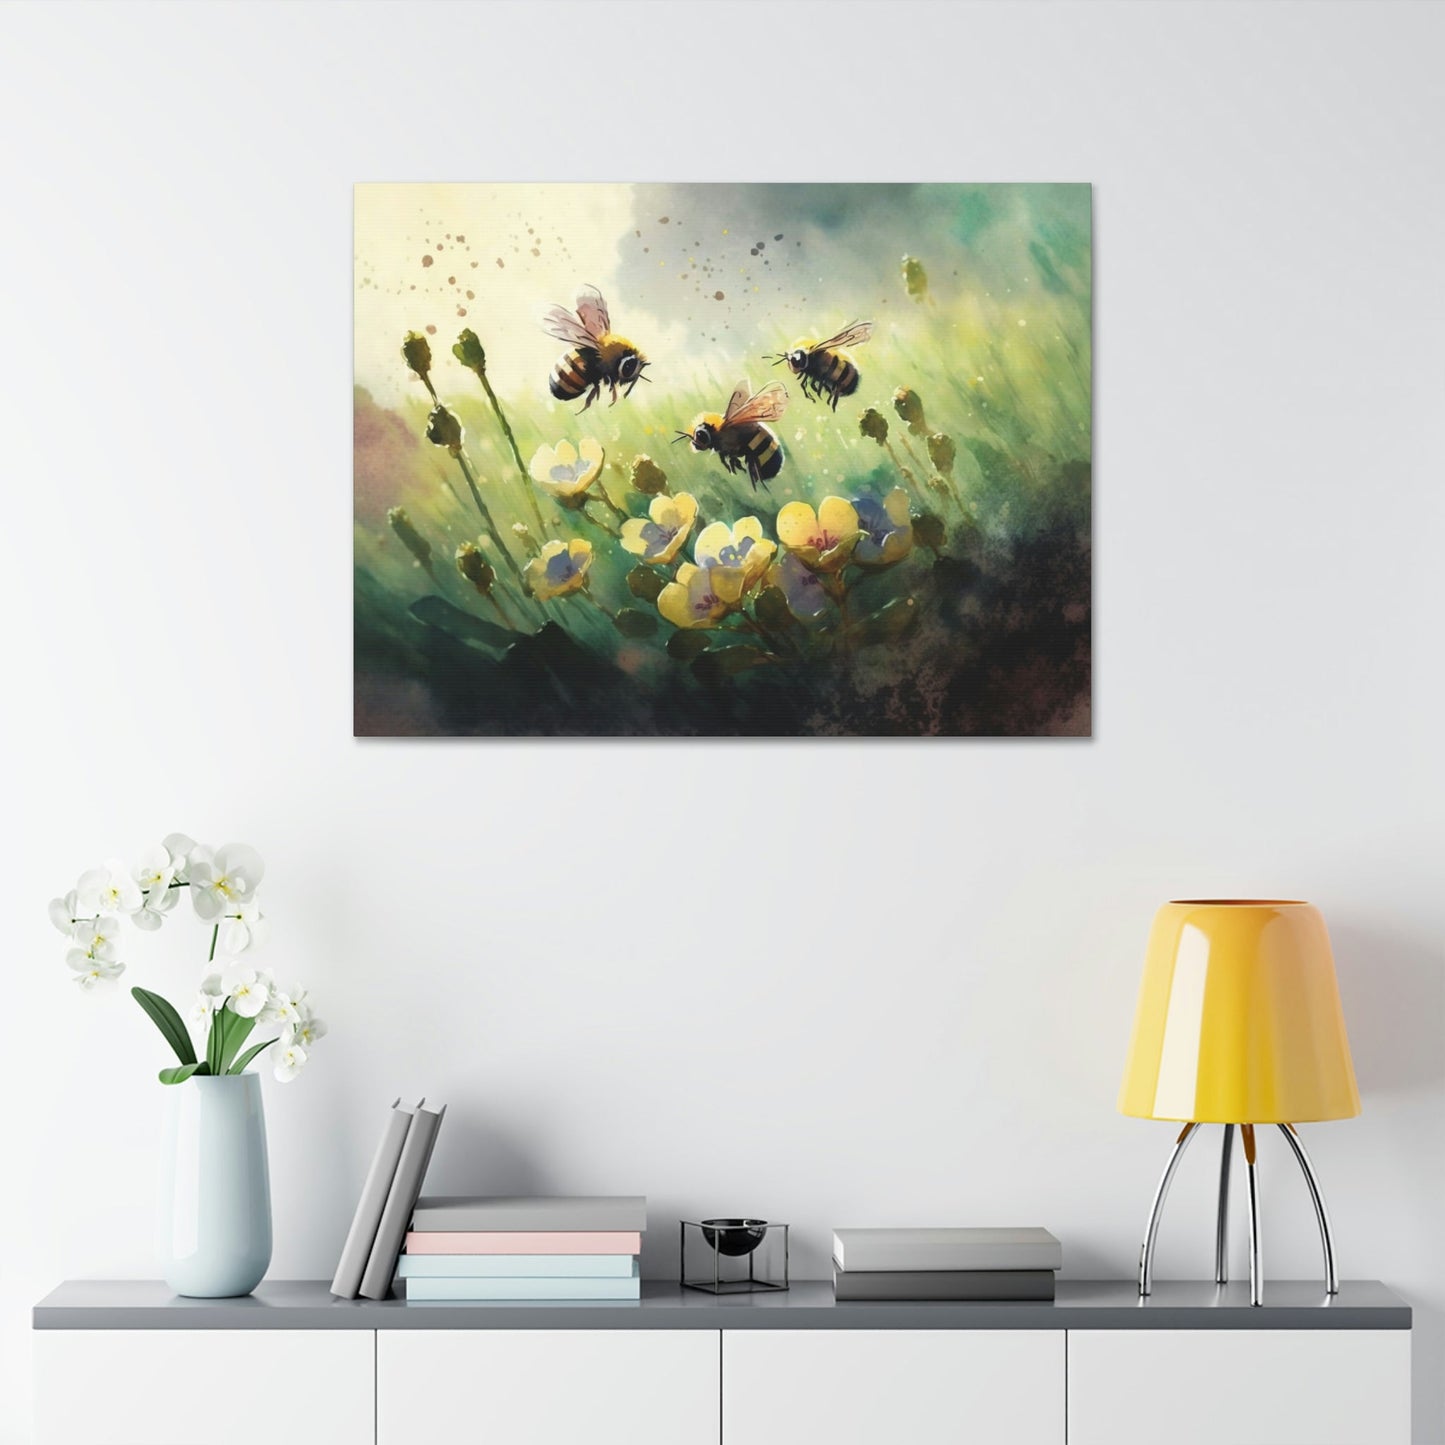 Pollinator Paradise: A Poster & Canvas Print of a Garden Teeming with Bees